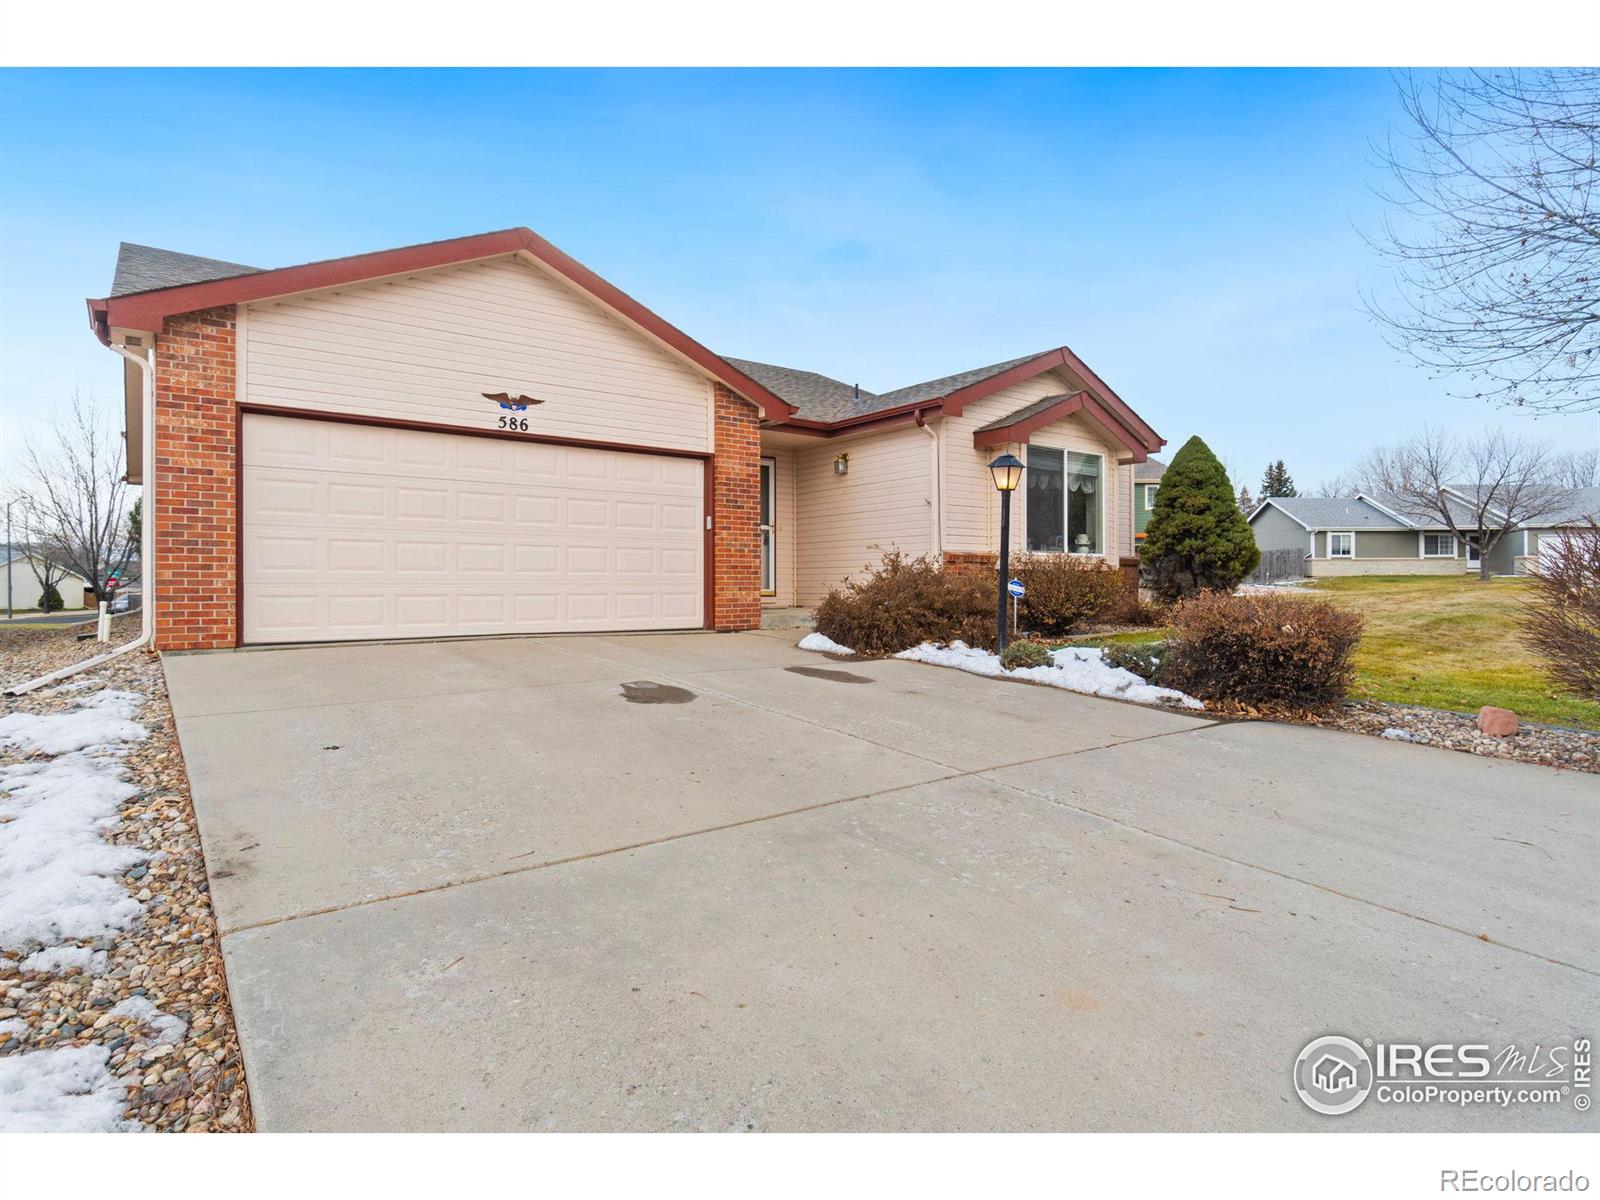 Report Image for 586  Radiant Drive,Loveland, Colorado